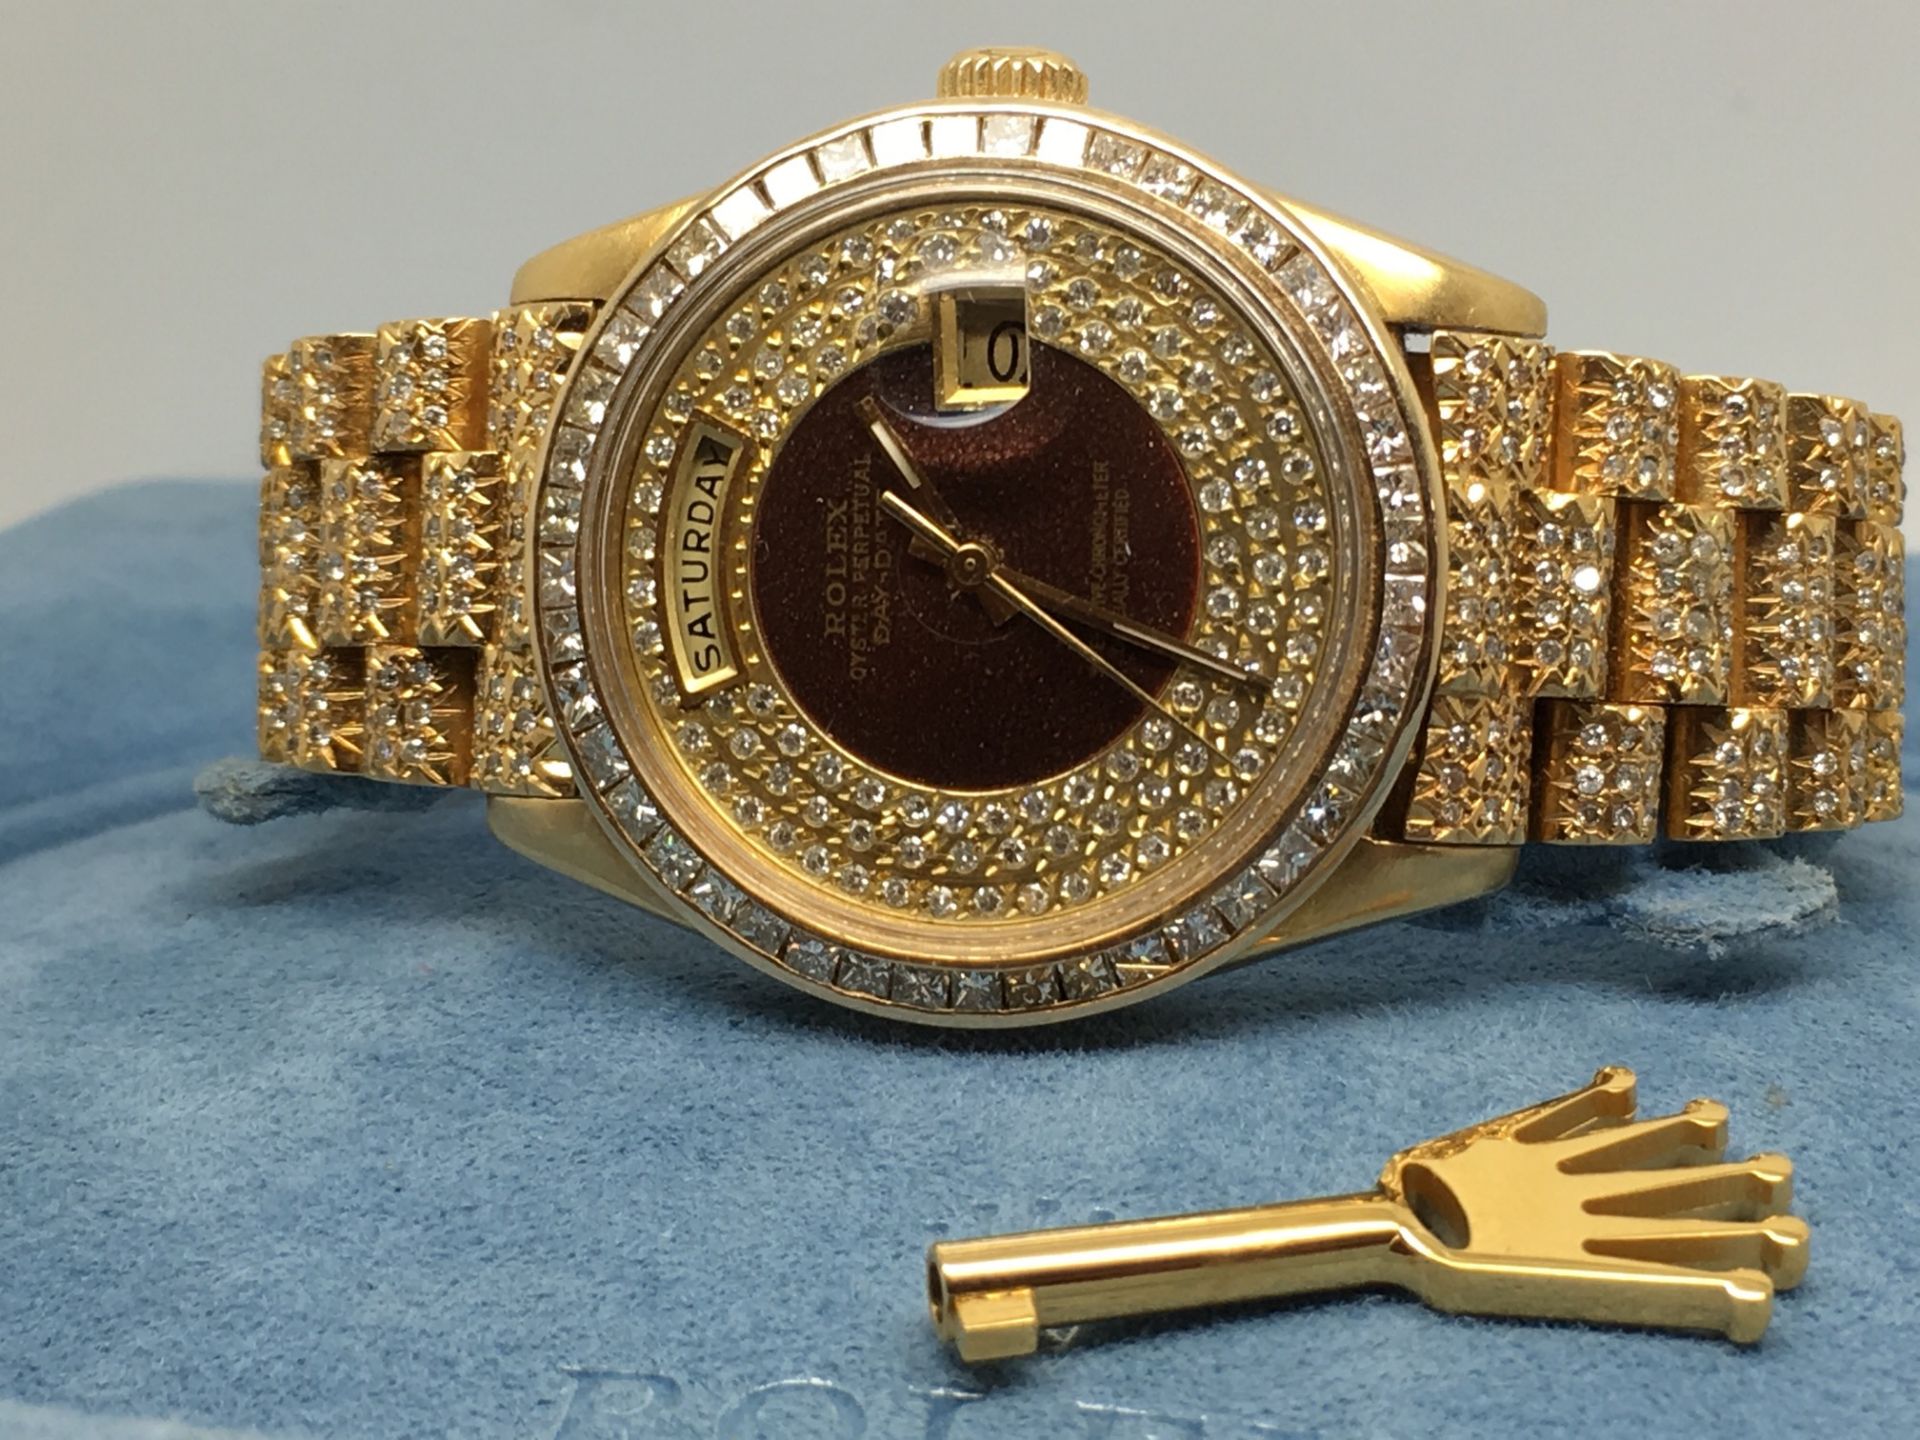 ** ROLEX PRESIDENTIAL Mens Solid 18K Diamond Encrusted Rolex Day-Date Watch VALUATION: £104,500 ** - Image 7 of 9